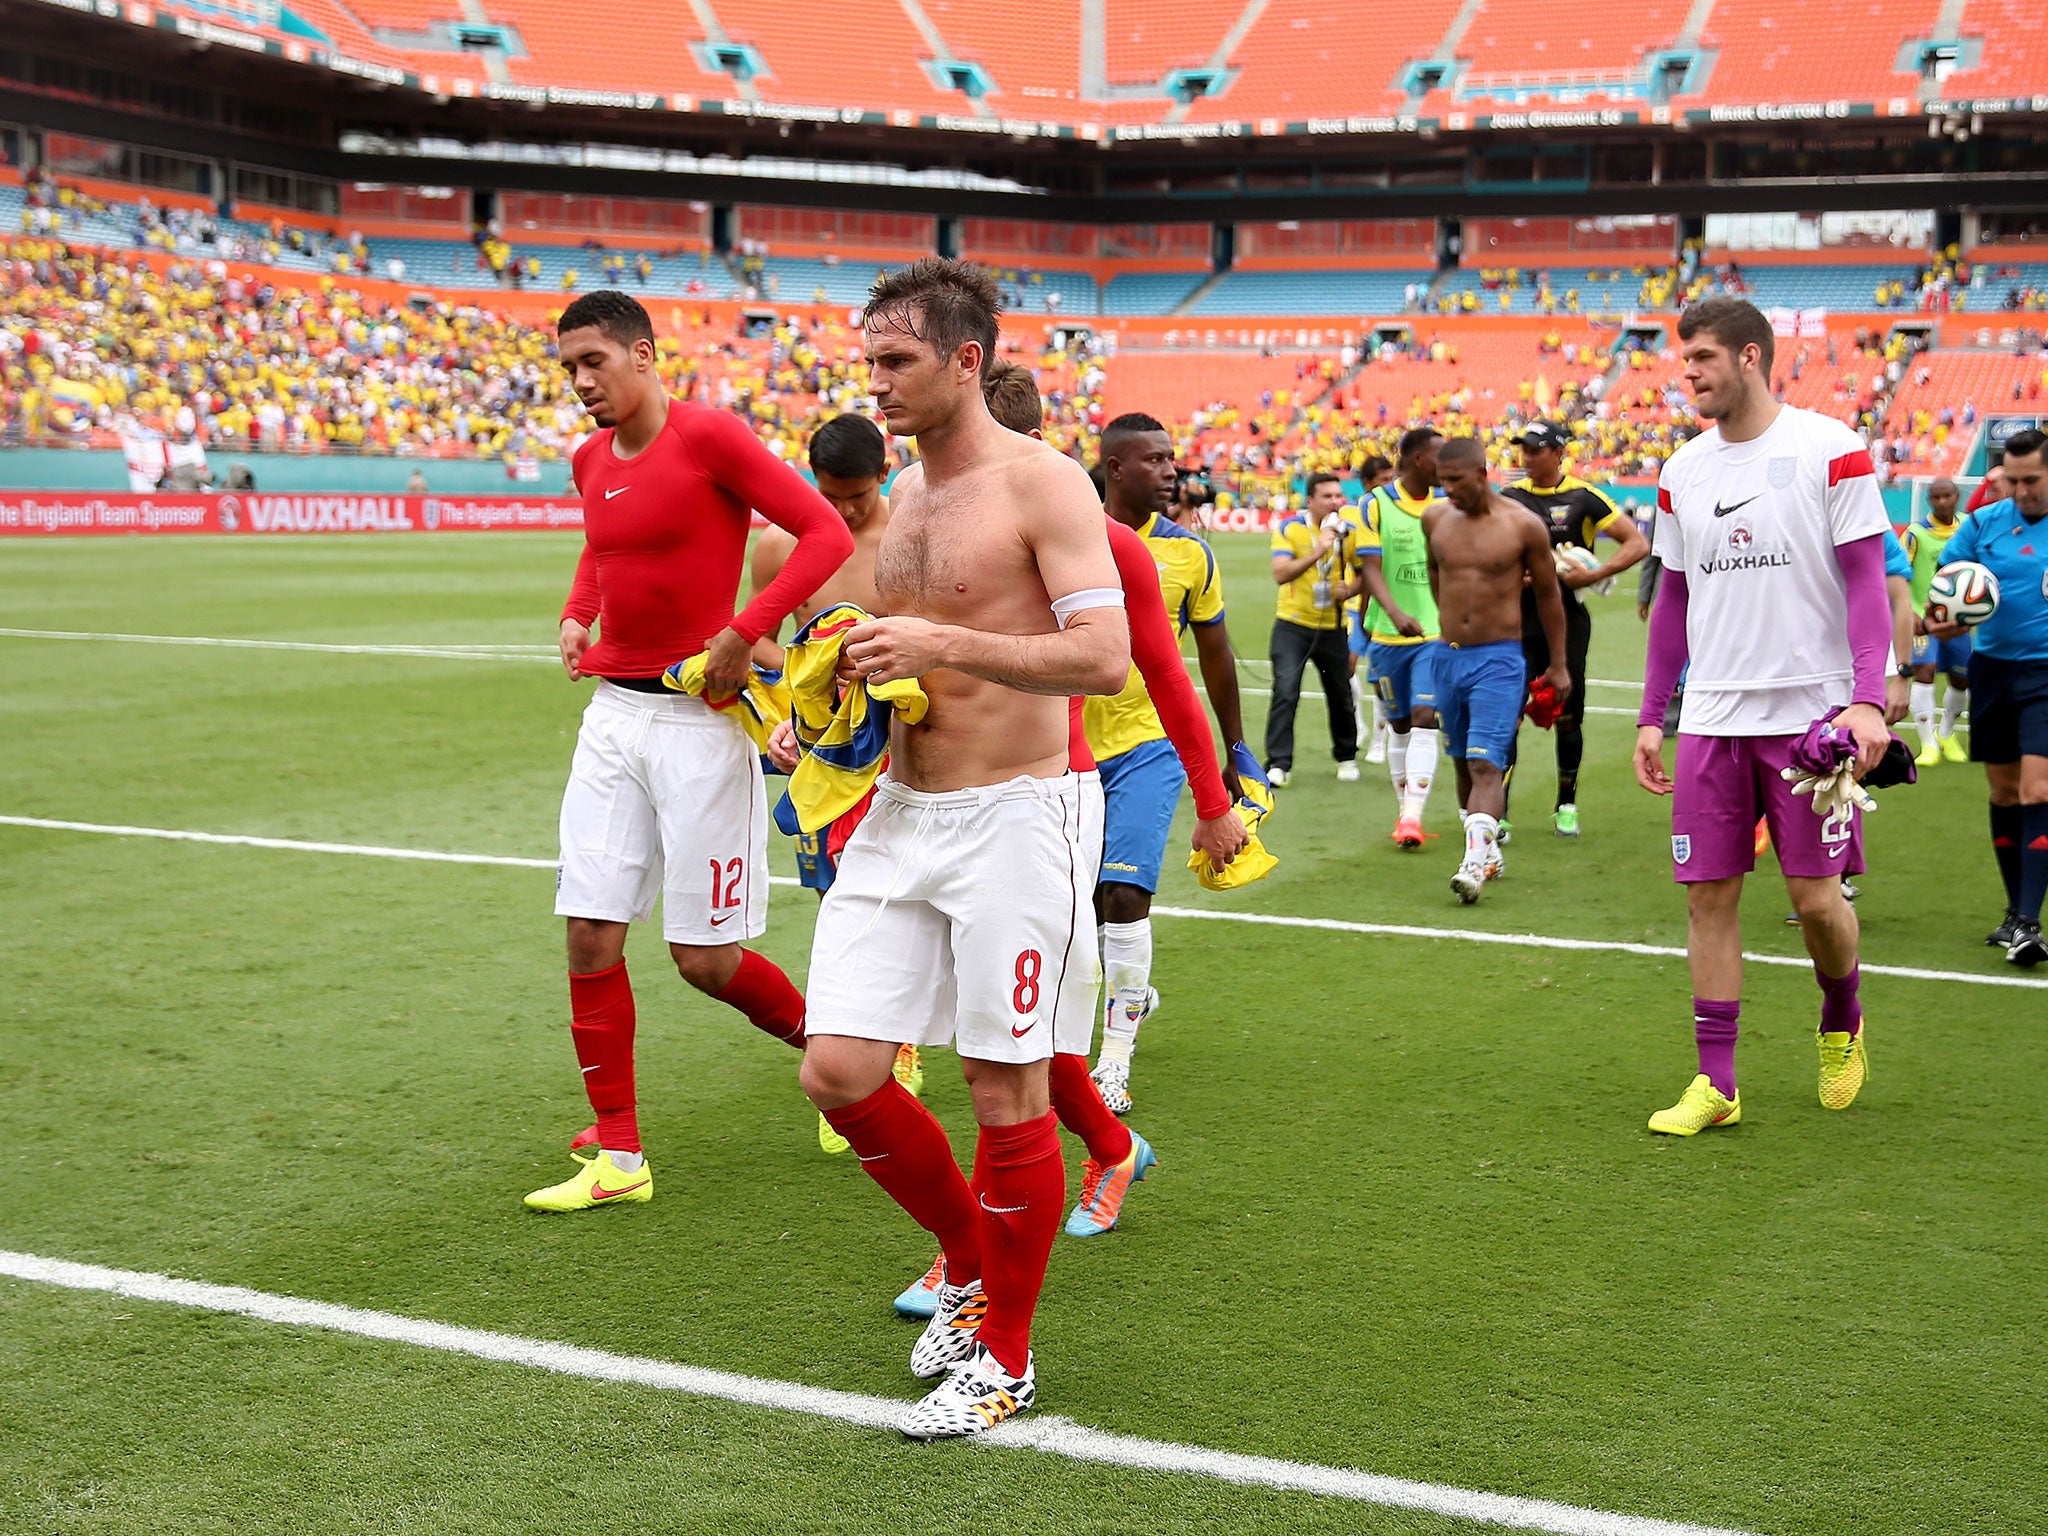 Frank Lampard leads England off the field in Miami following their 2-2 draw with Ecuador